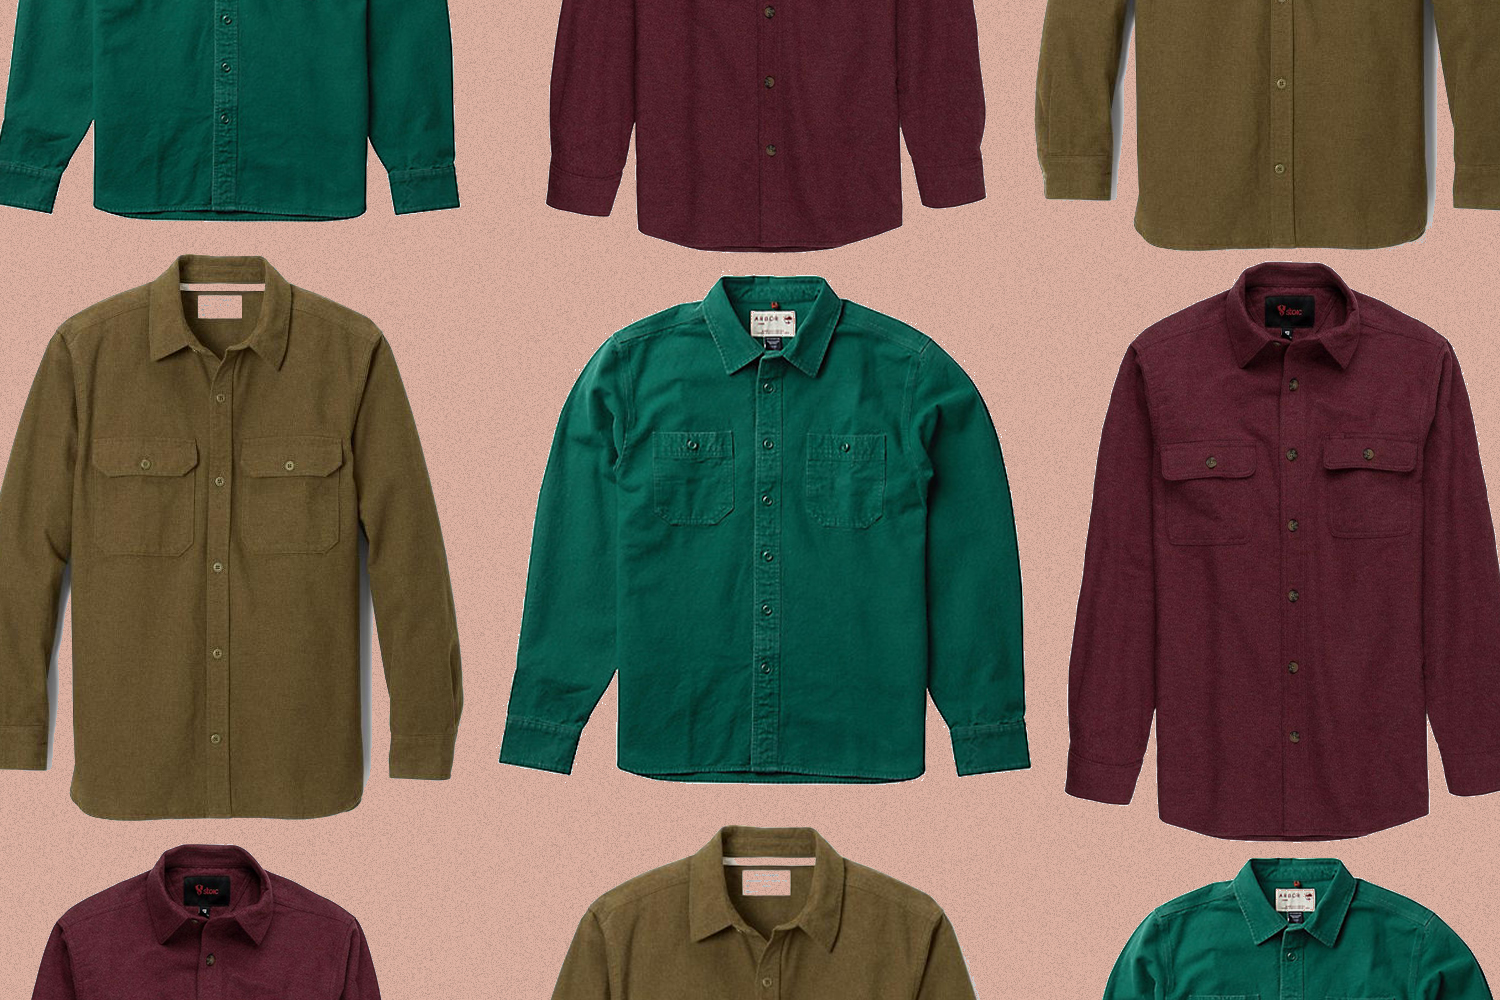 Trade Your Tired Flannels for a Chamois Shirt Instead